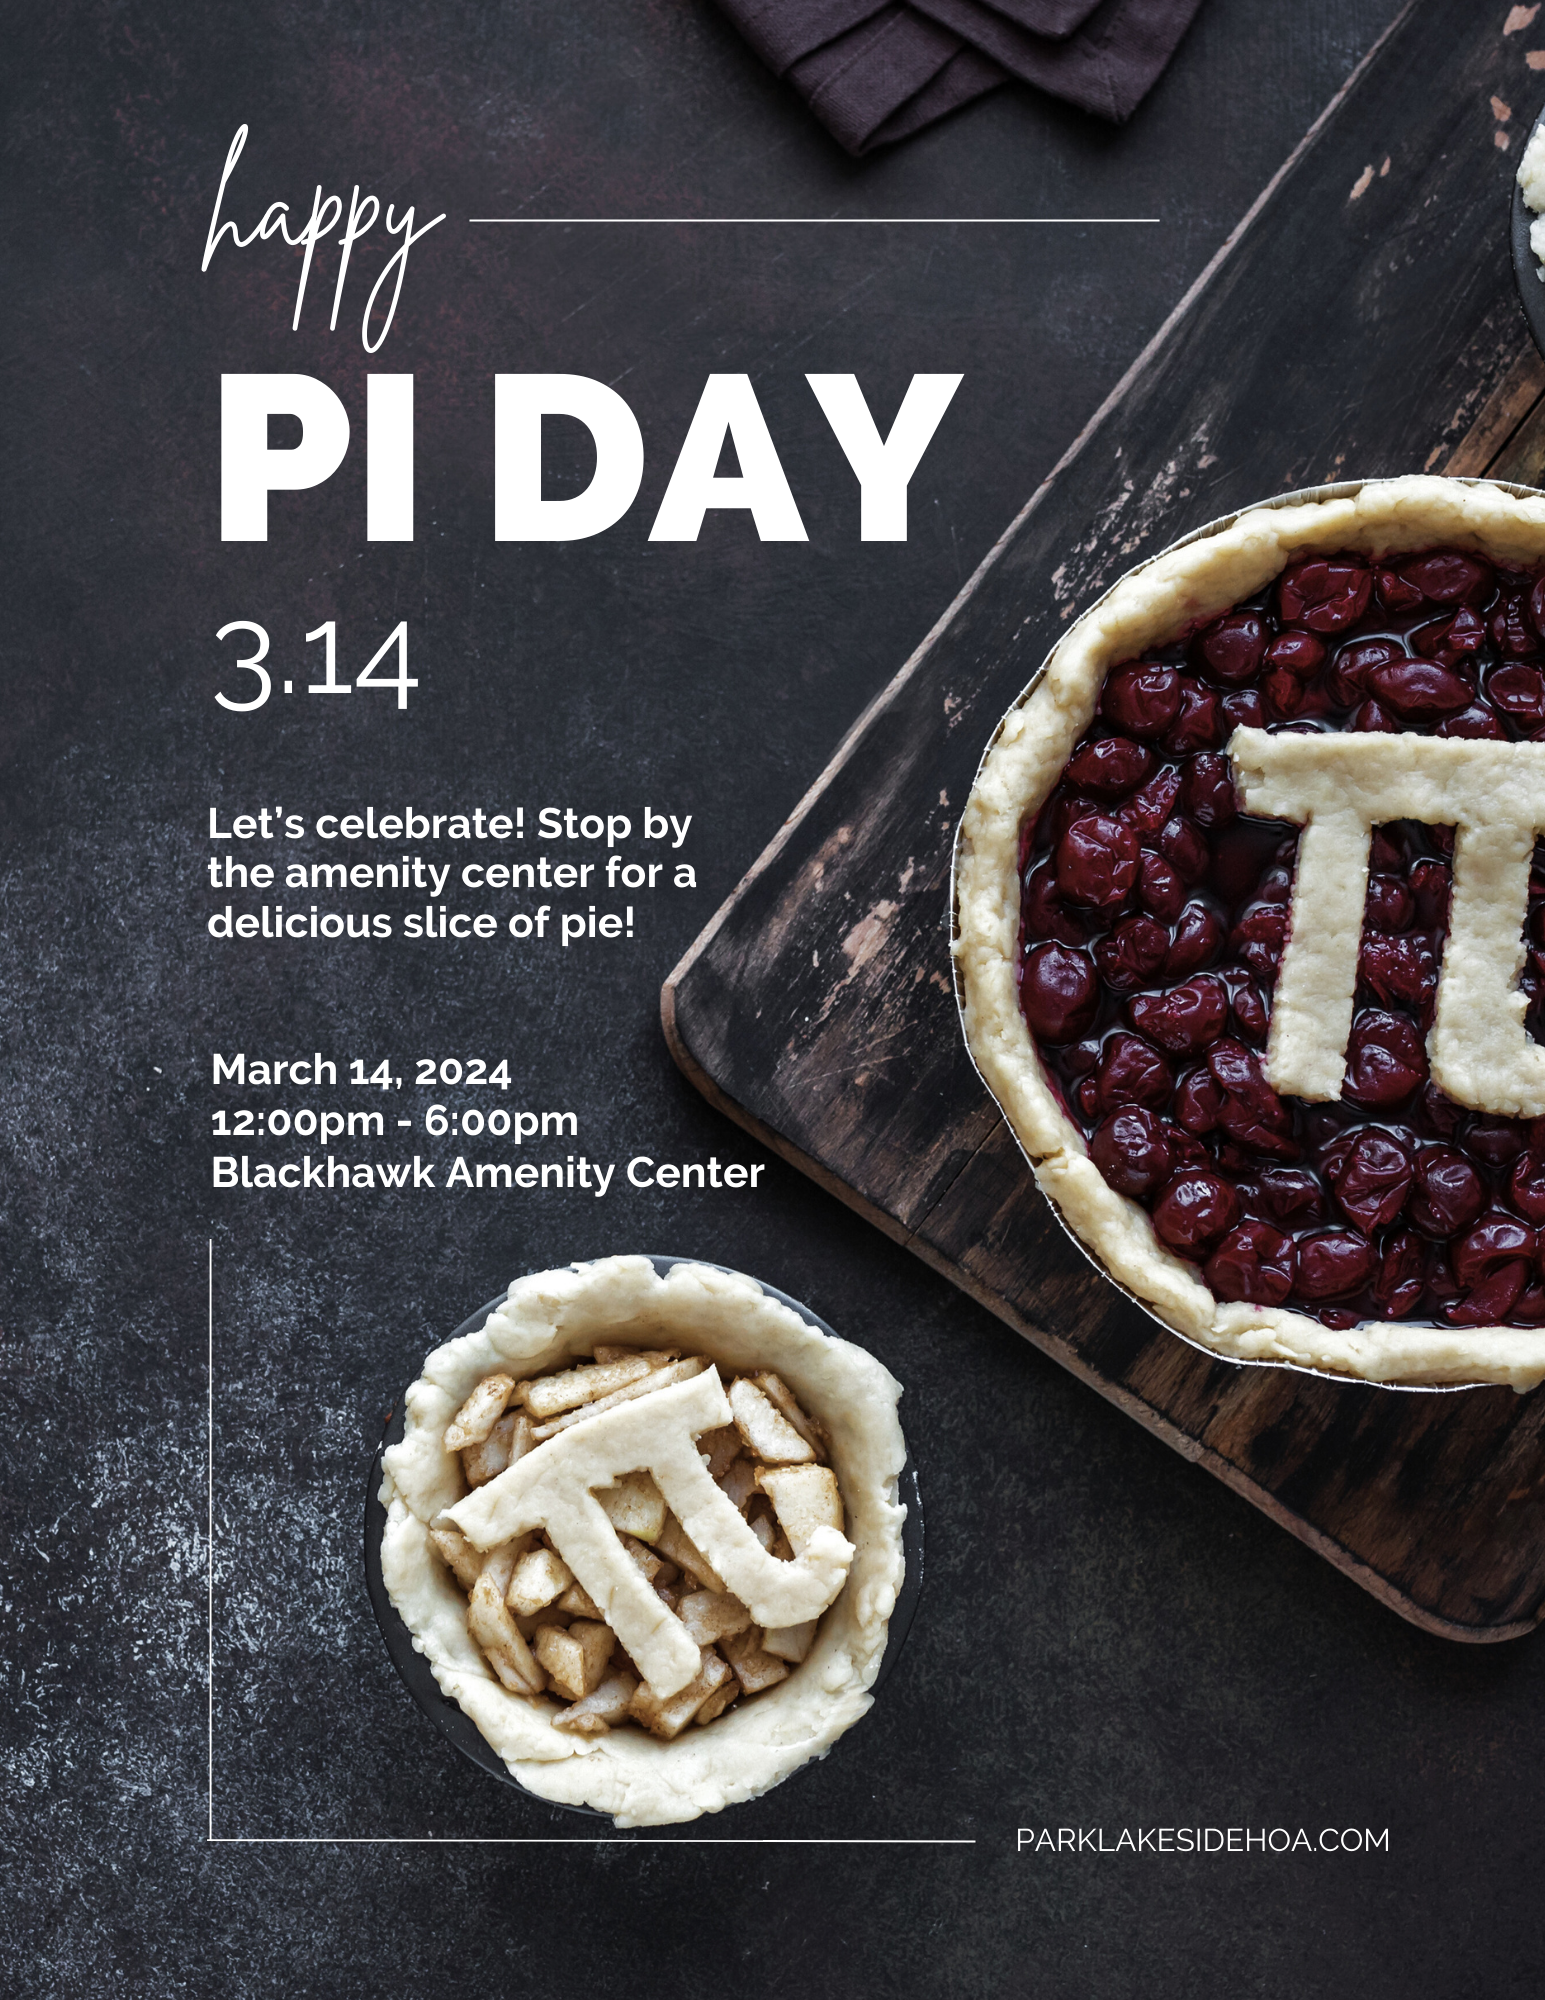 Flyer announcing Happy Pi Day celebration on March 14, 2024. It features images of two pies, one with a Pi symbol cut out of the crust, and invites people to join for a slice of pie at the Blackhawk Amenity Center from 12:00 pm to 6:00 pm. The website parklakesidehoa.com is mentioned at the bottom.